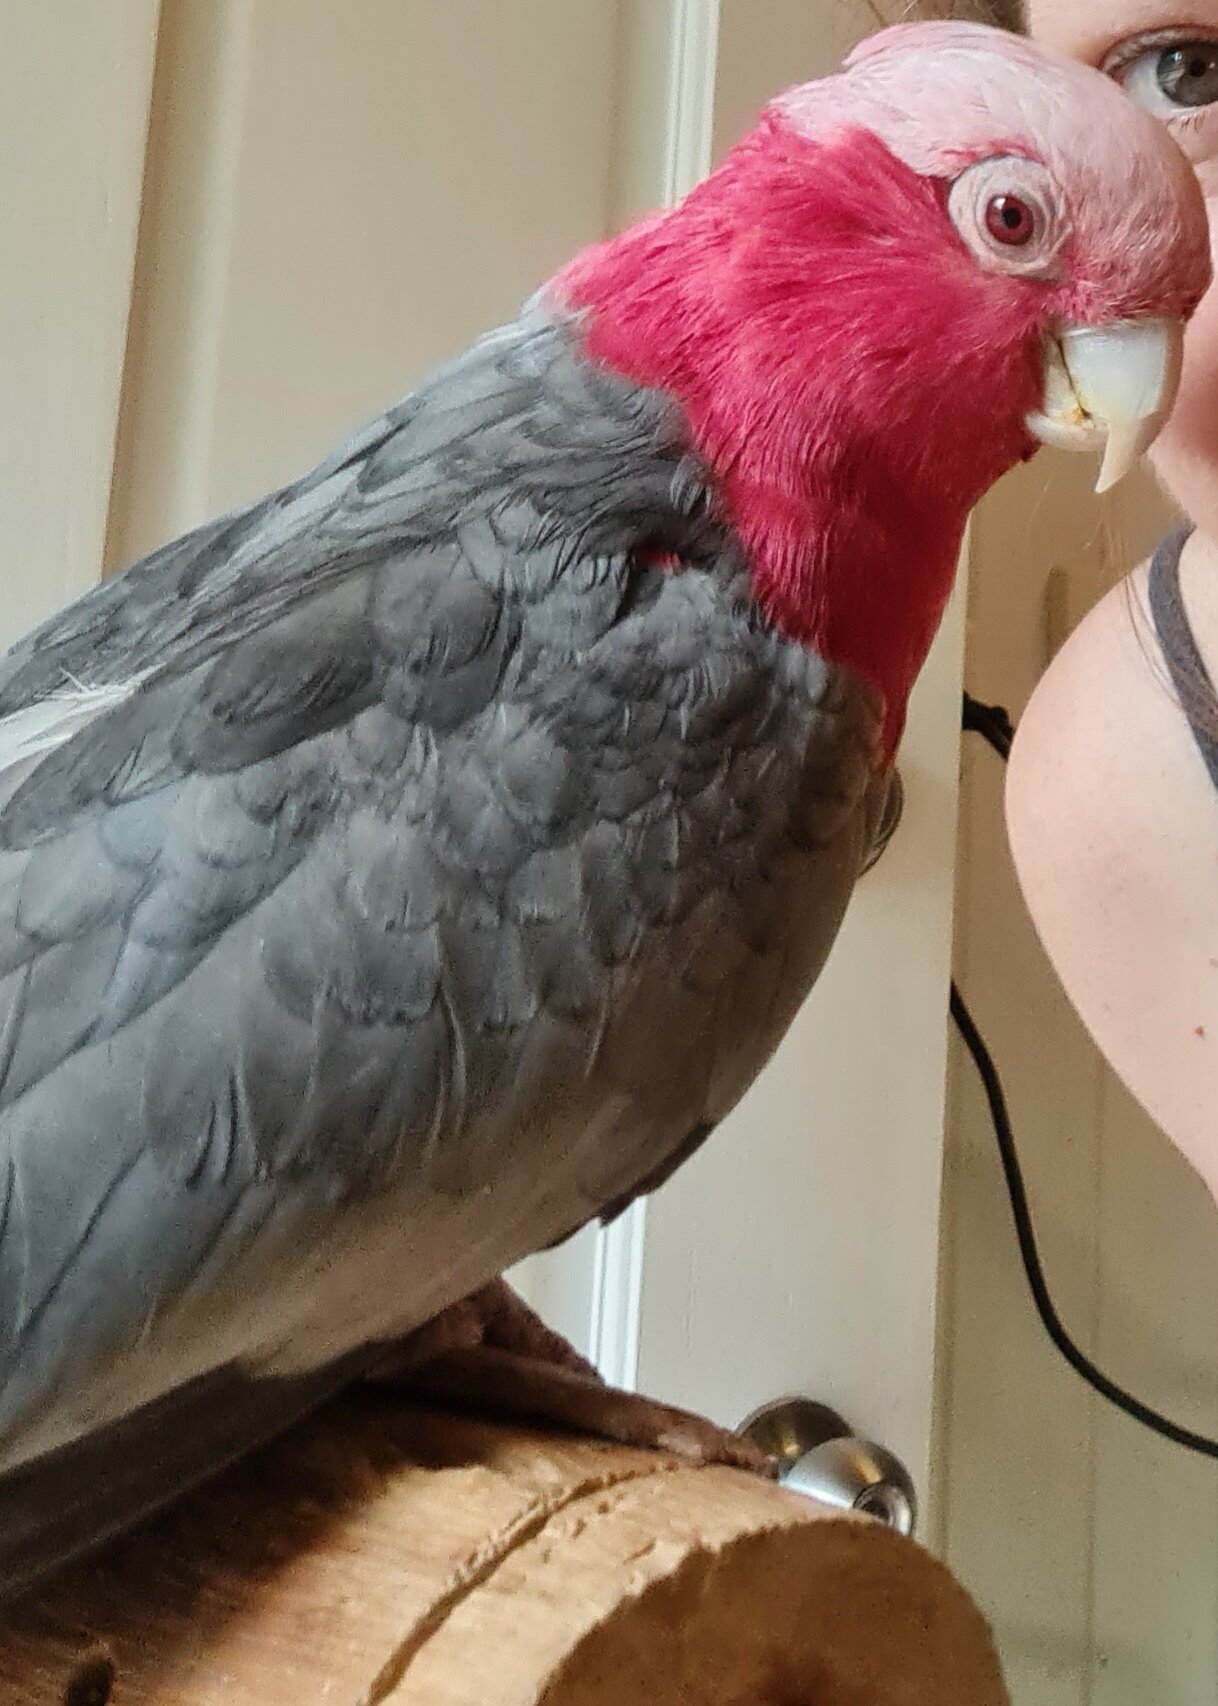 #Testimonial: The experience of treating a family member with CBD: RiffRaff, the Galah cockatoo.